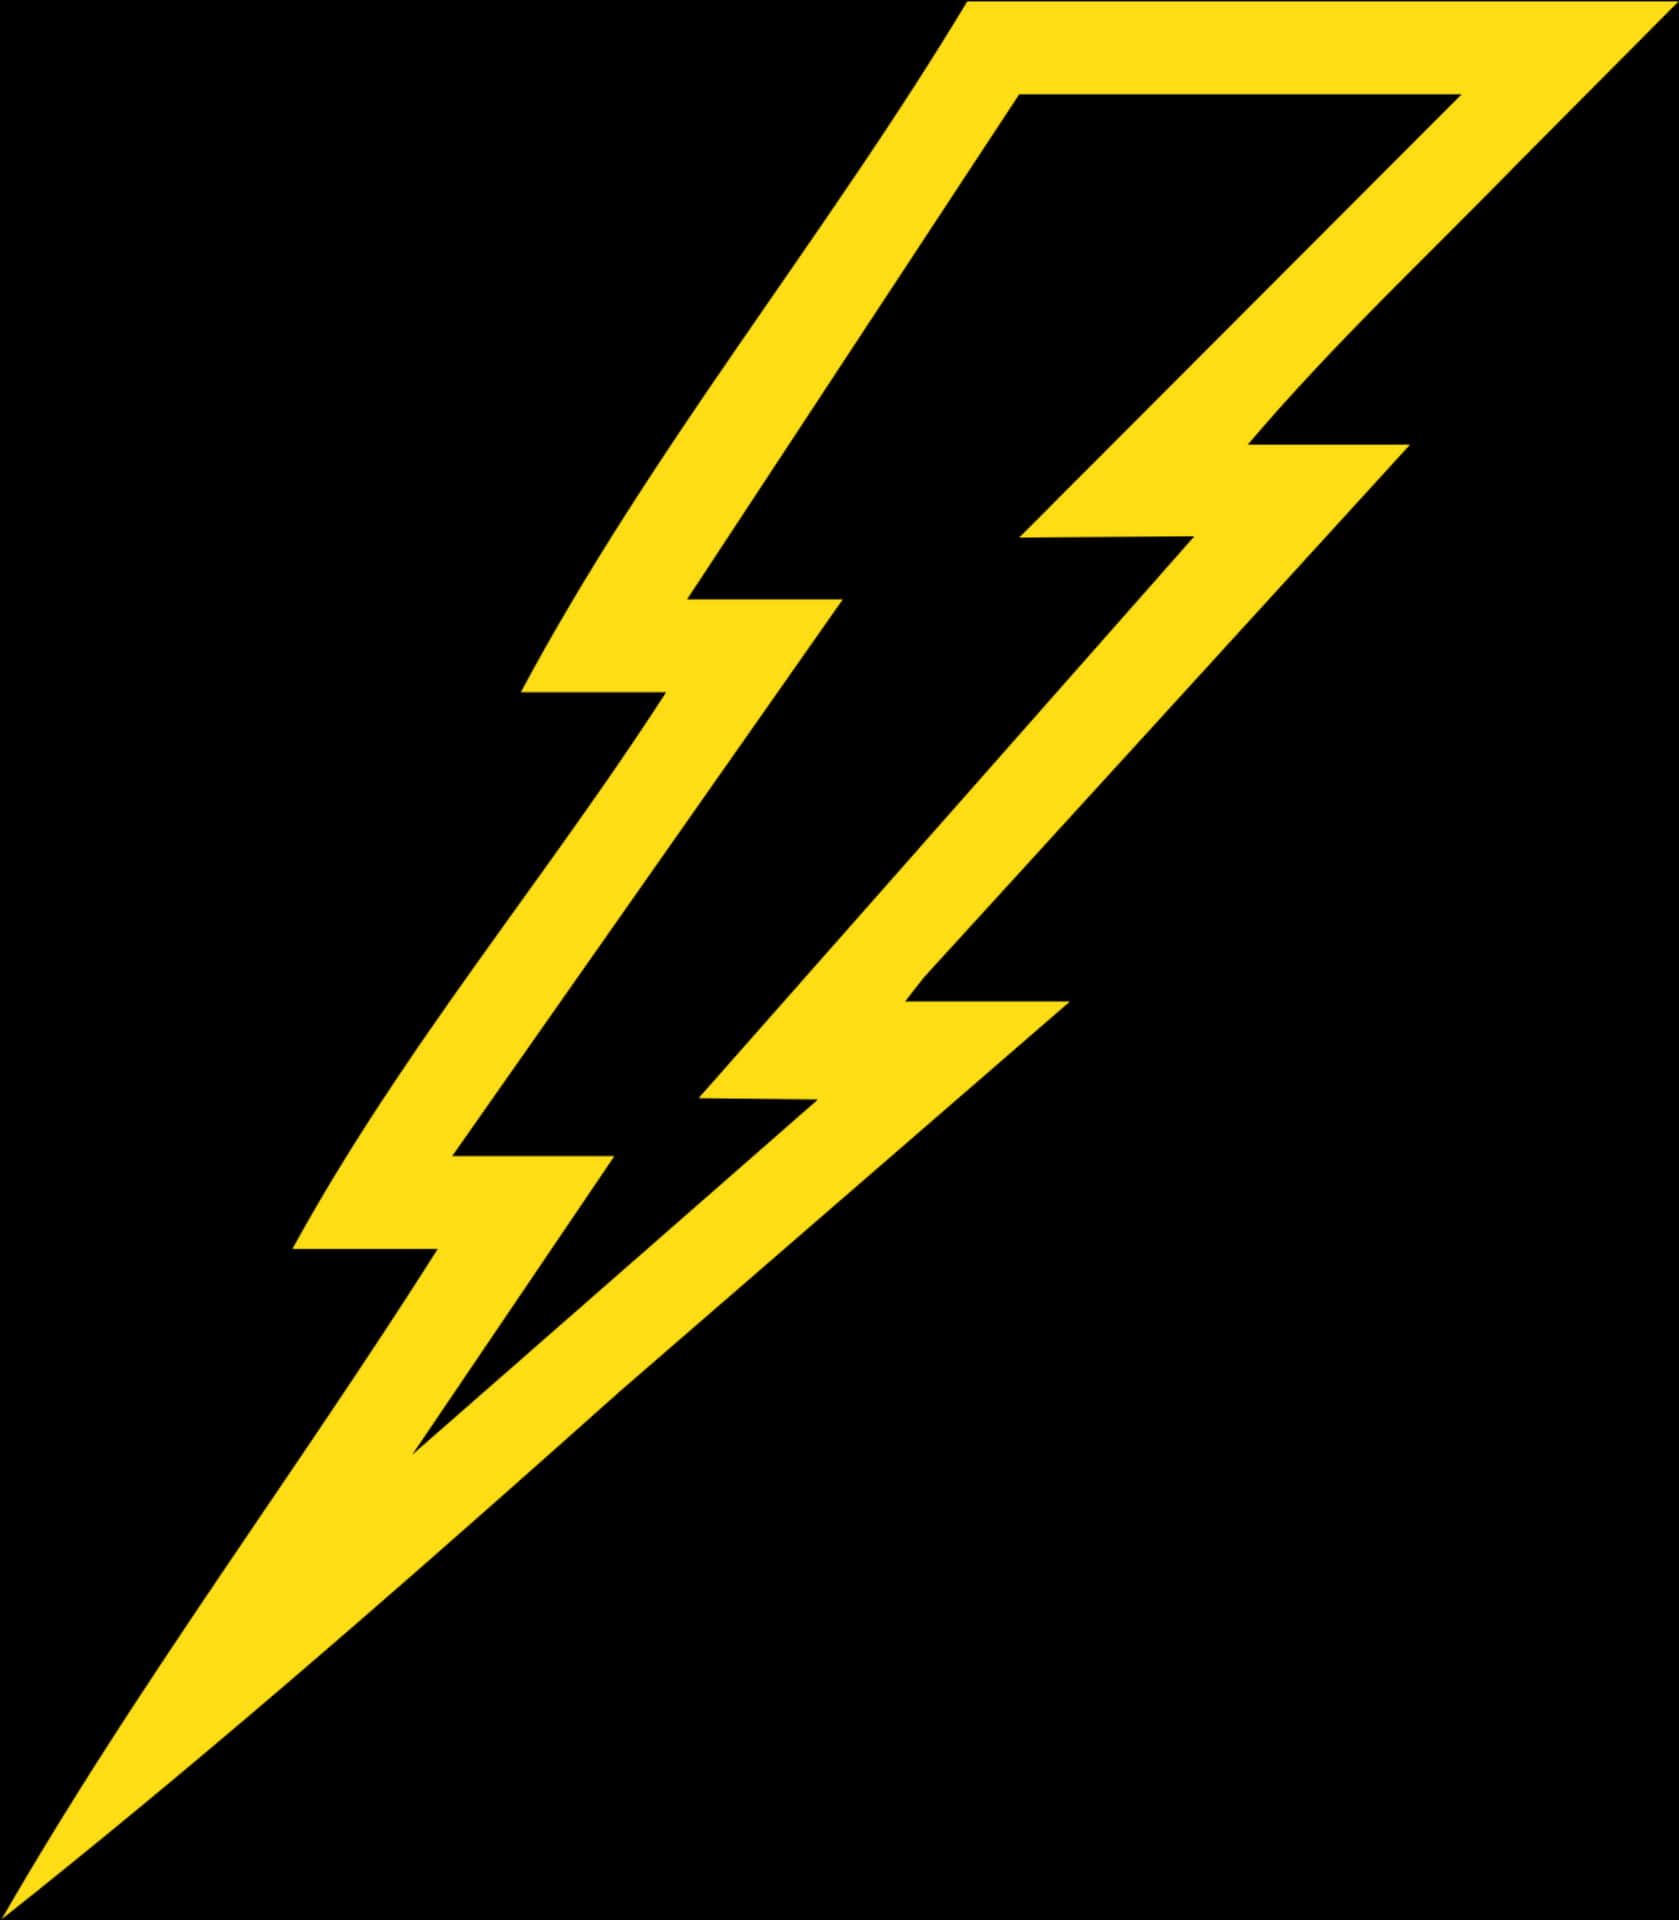 Yellow Lightning Bolt Graphic PNG image